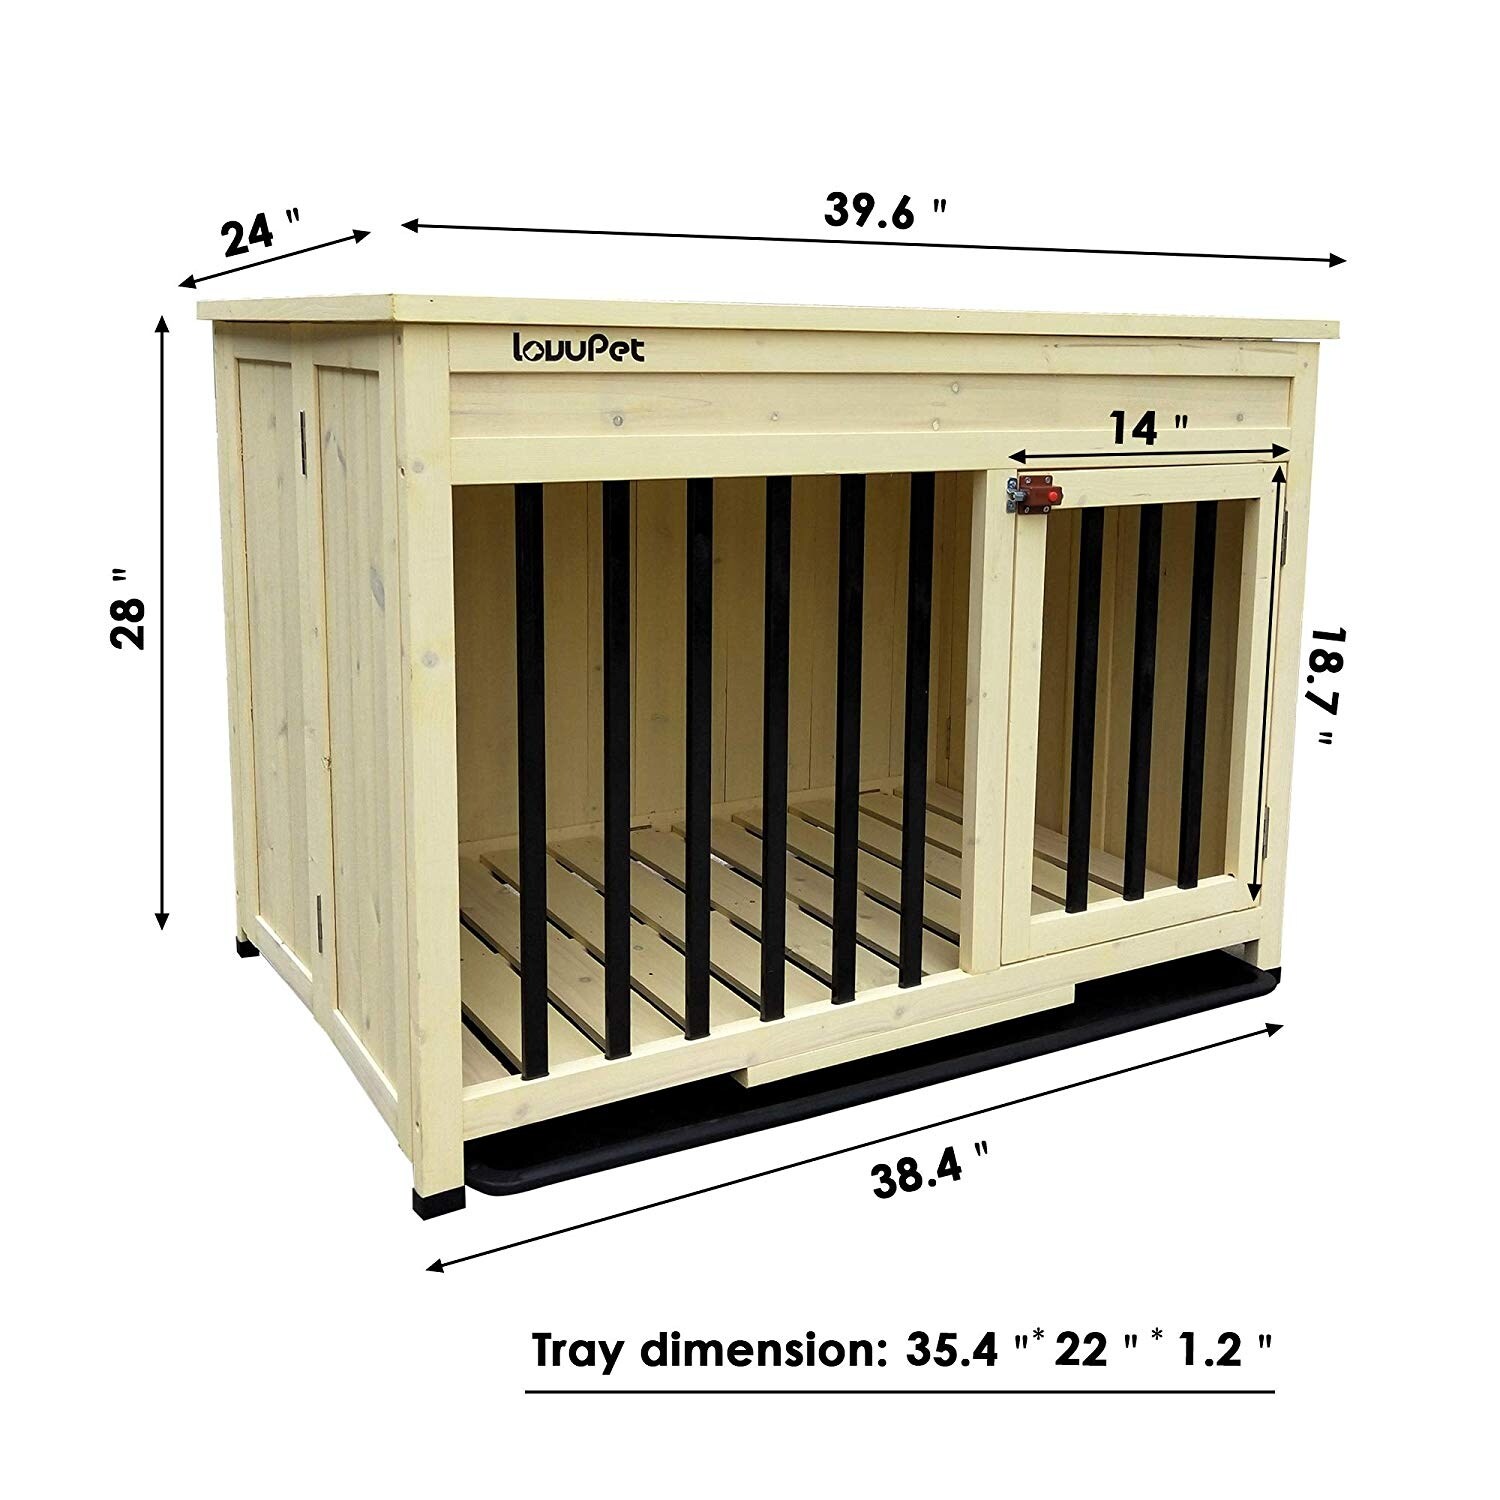 dog kennel crate